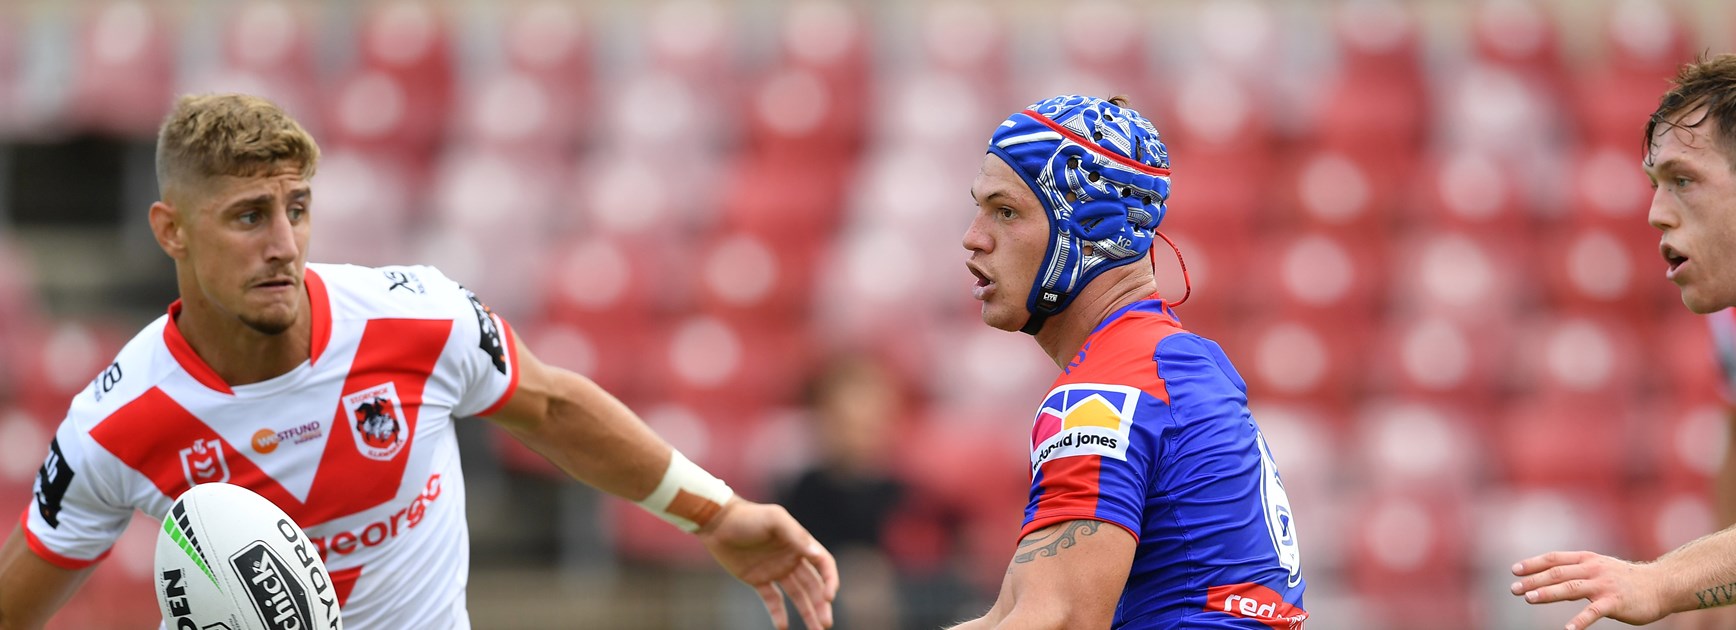 Kalyn Ponga in action against the Dragons.